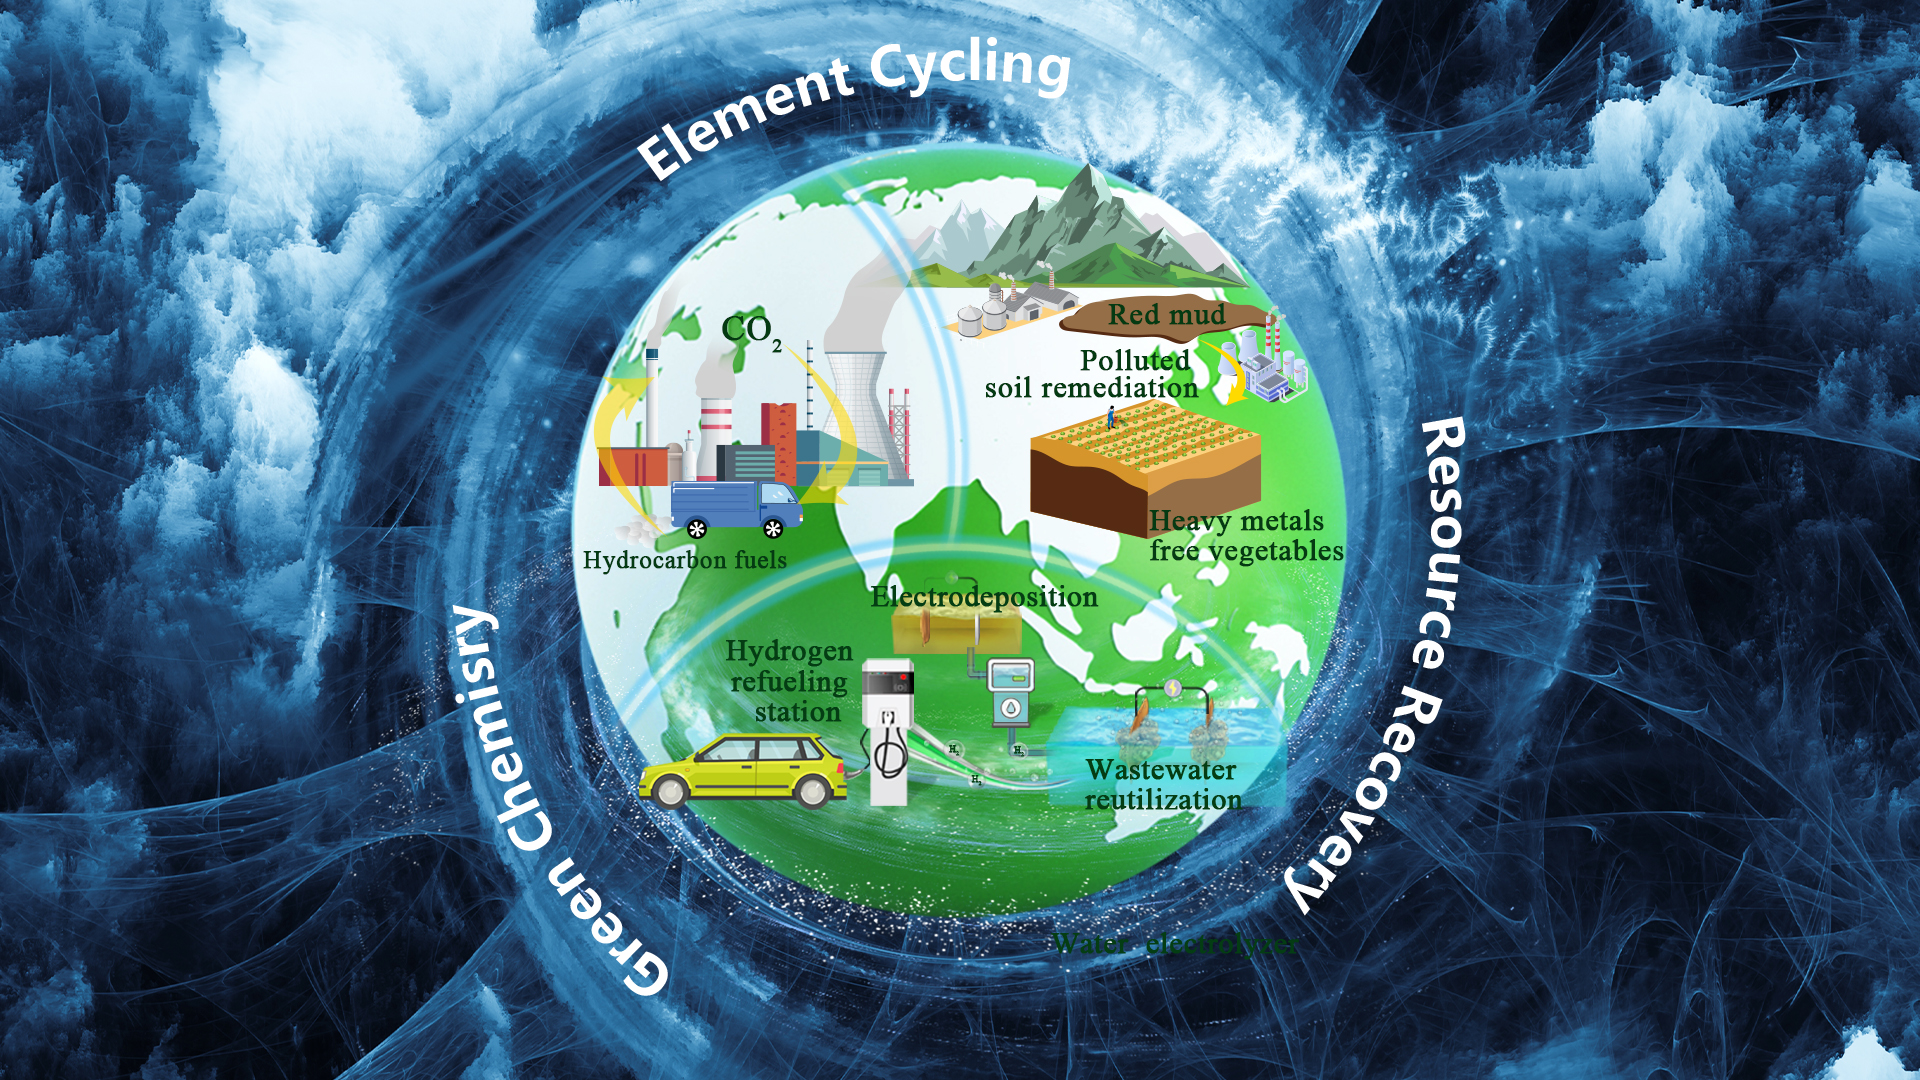 Significant progress in resource recycling and pollution control chemistry